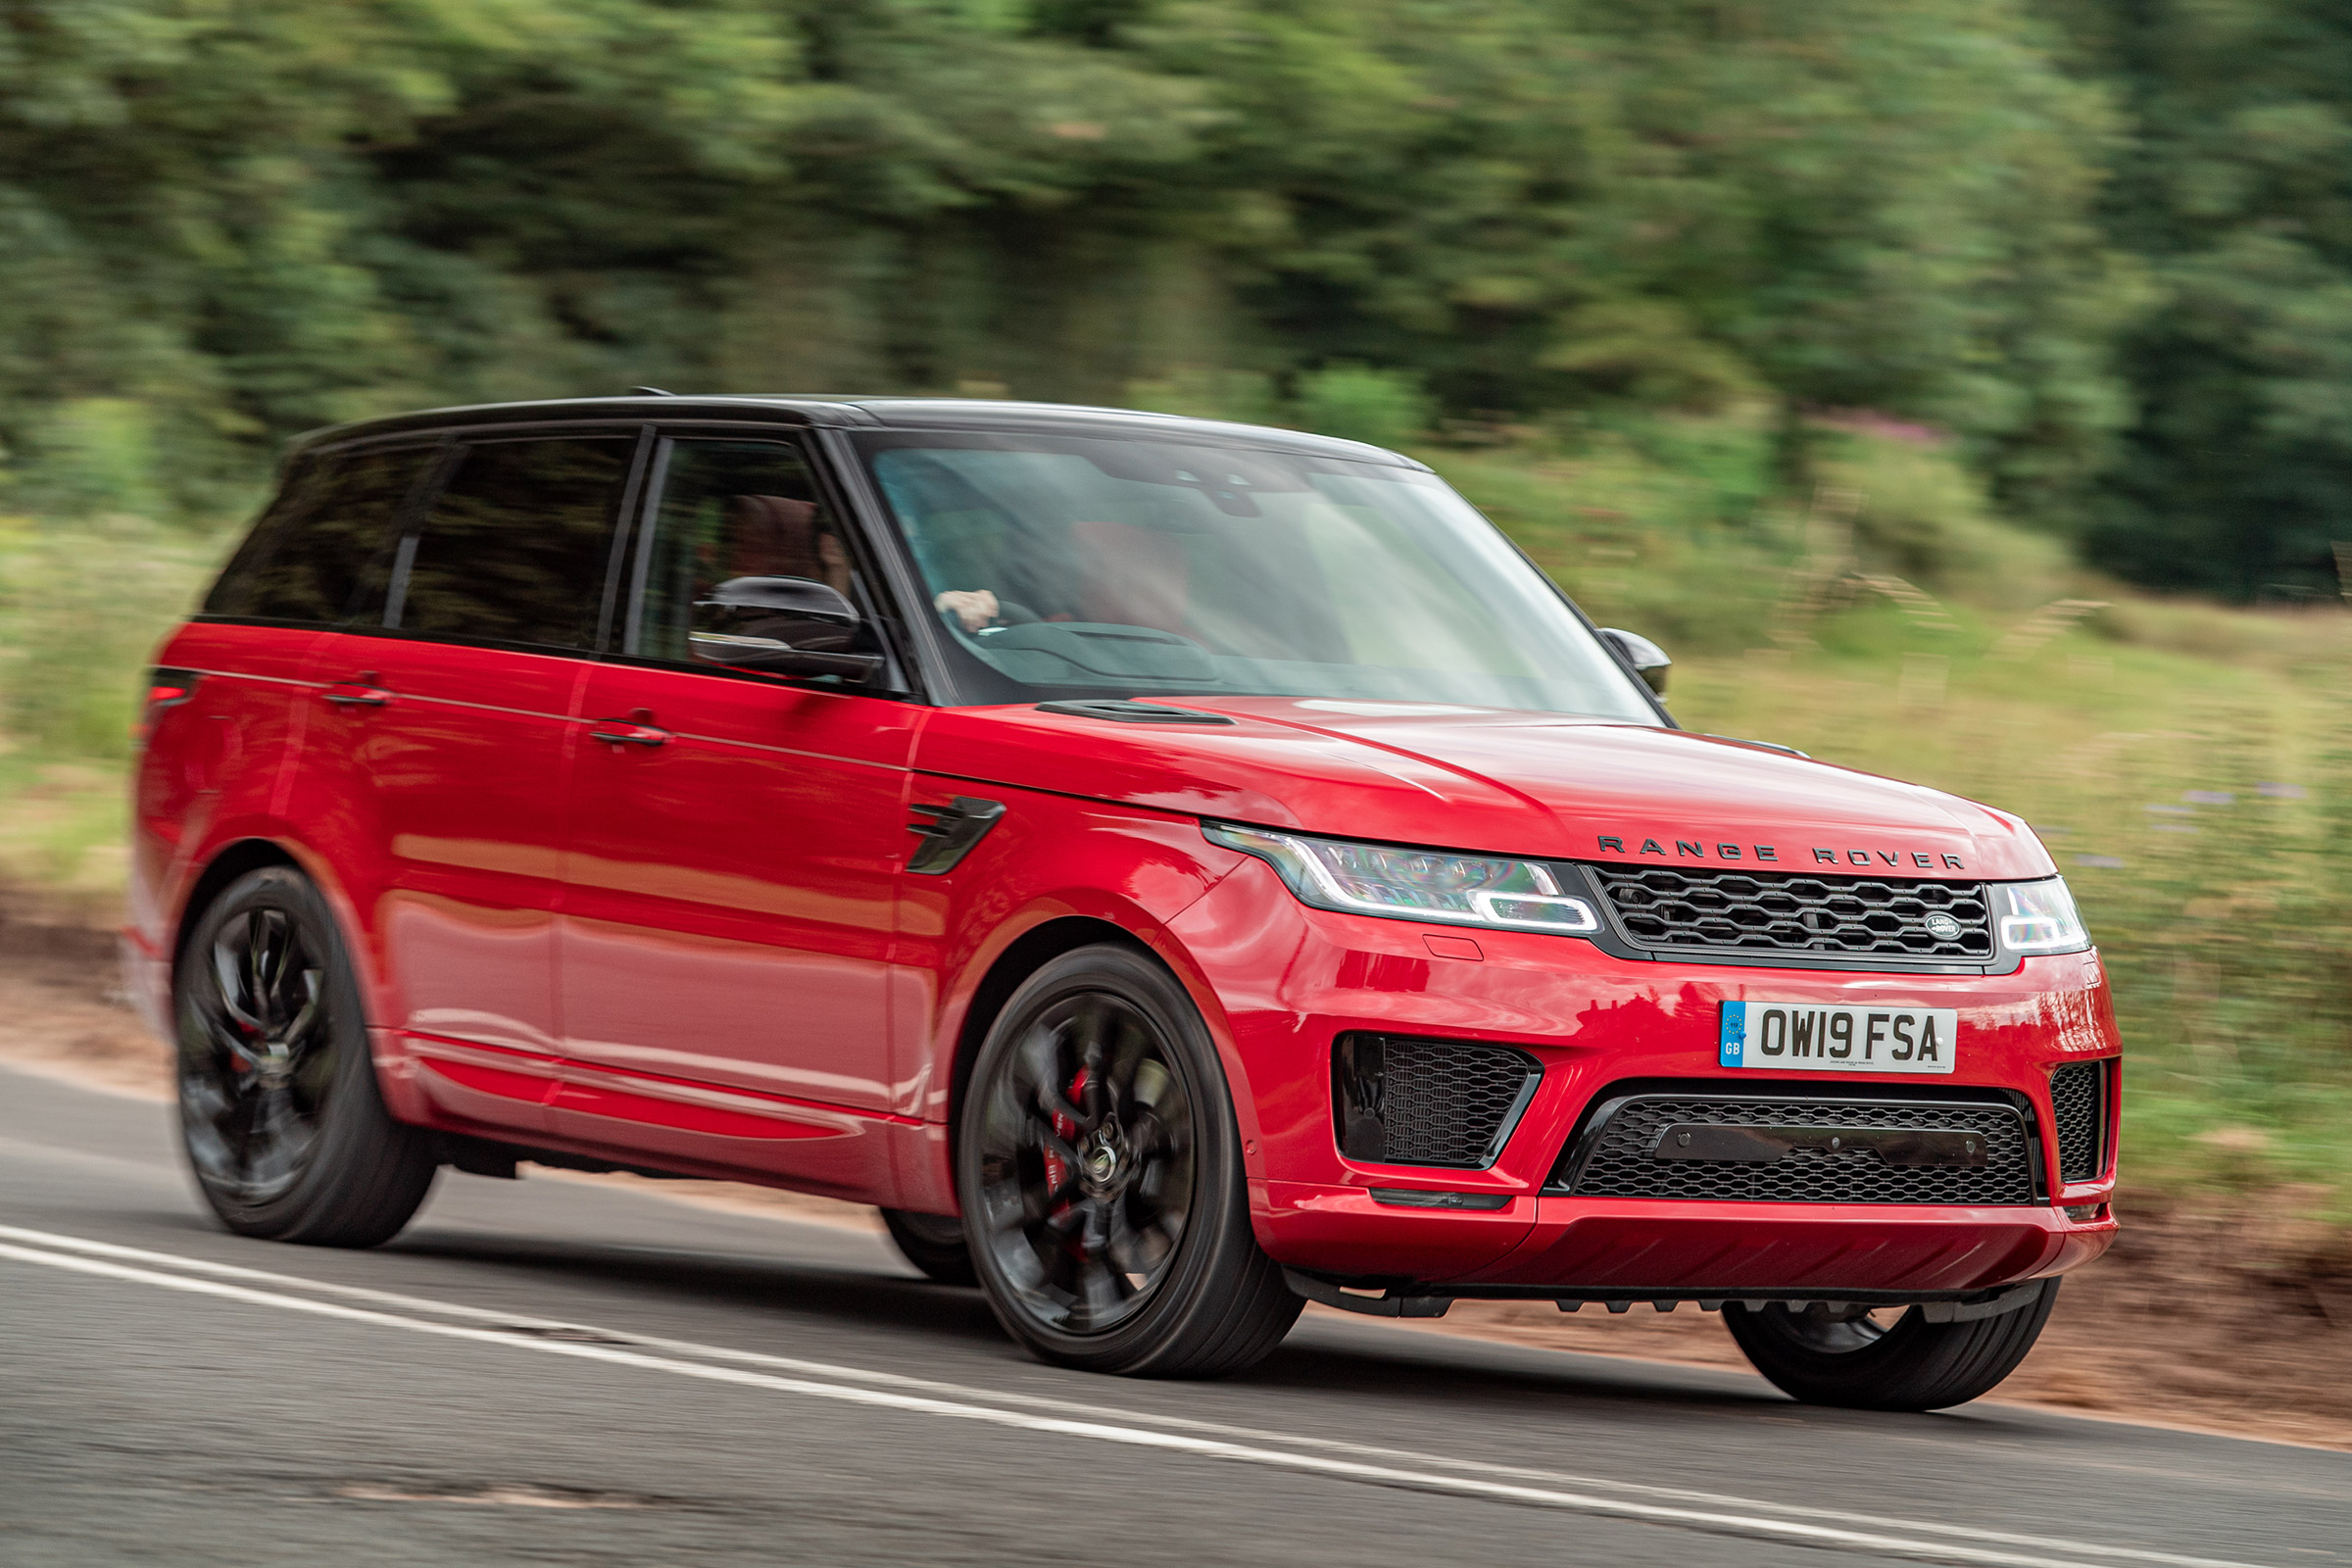 Range Rover Sport Hse 2018 Price Uk  . Orange Blossom Trl, Orlando Fl 32837 We Price Our Quality Cars, Trucks And Suvs Below Market Price Daily To Offer The Absolute Best Value In Central Florida.